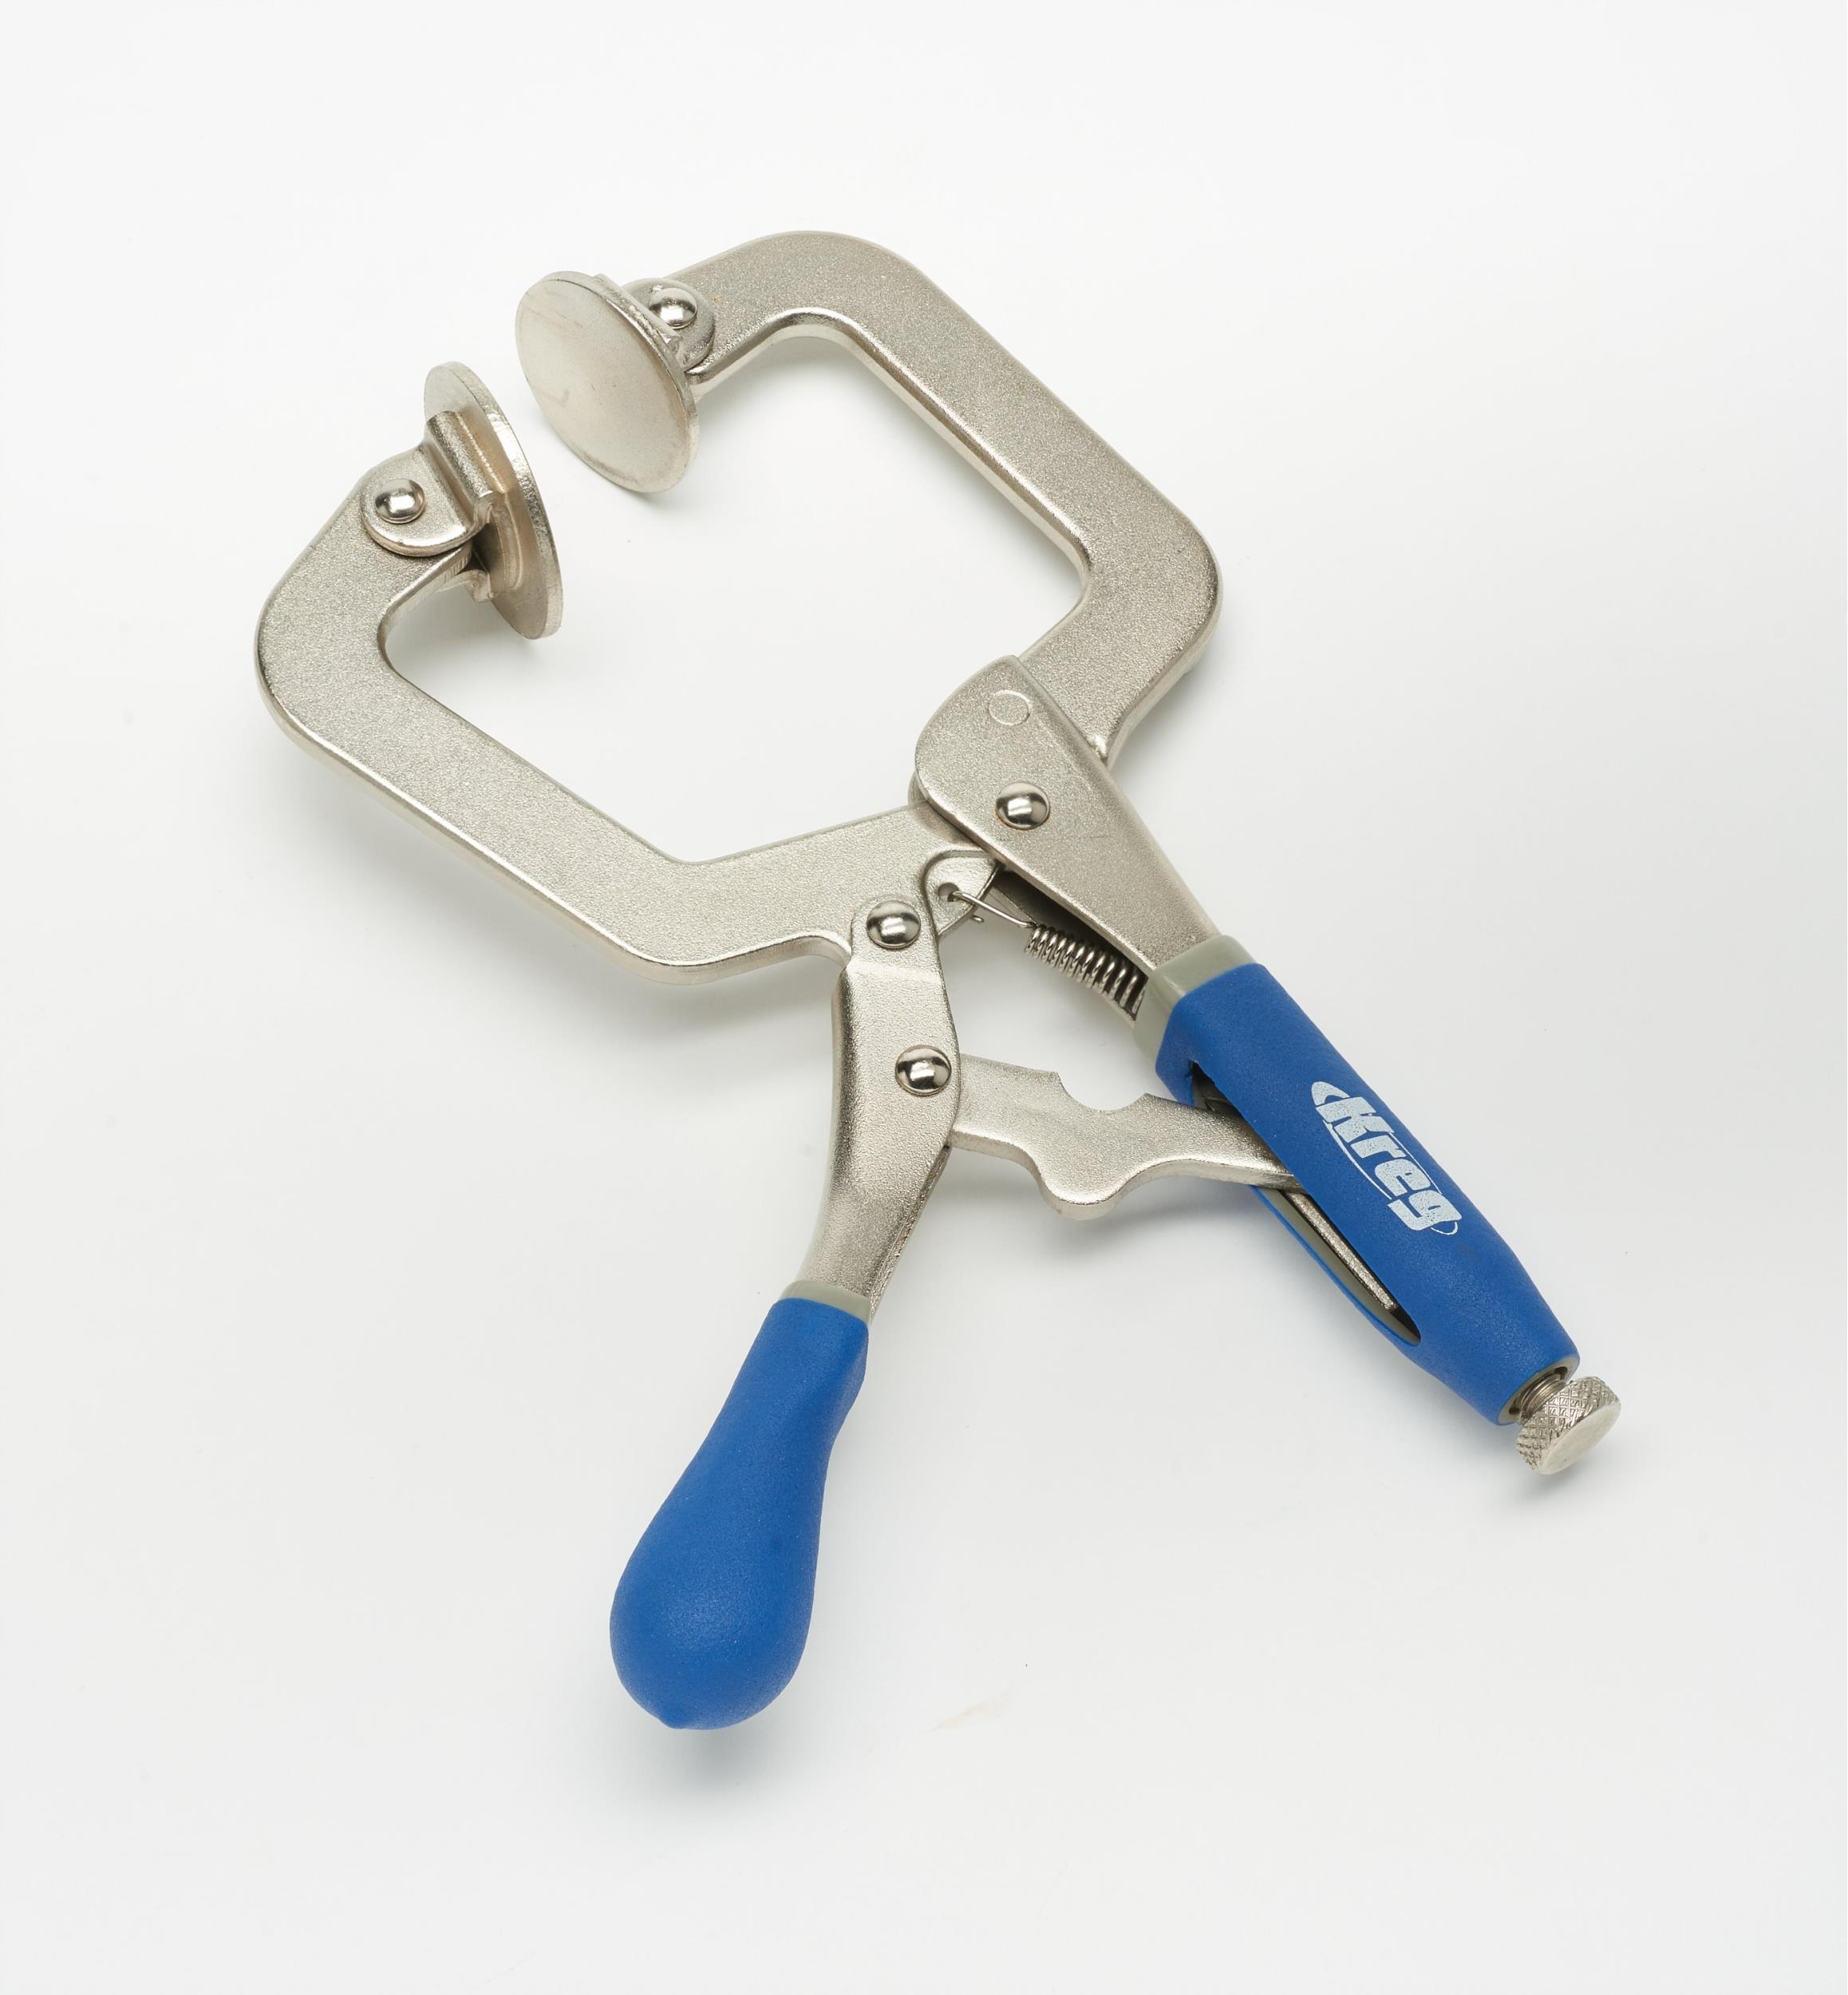 Kreg Face-Frame Clamp - Lee Valley Tools